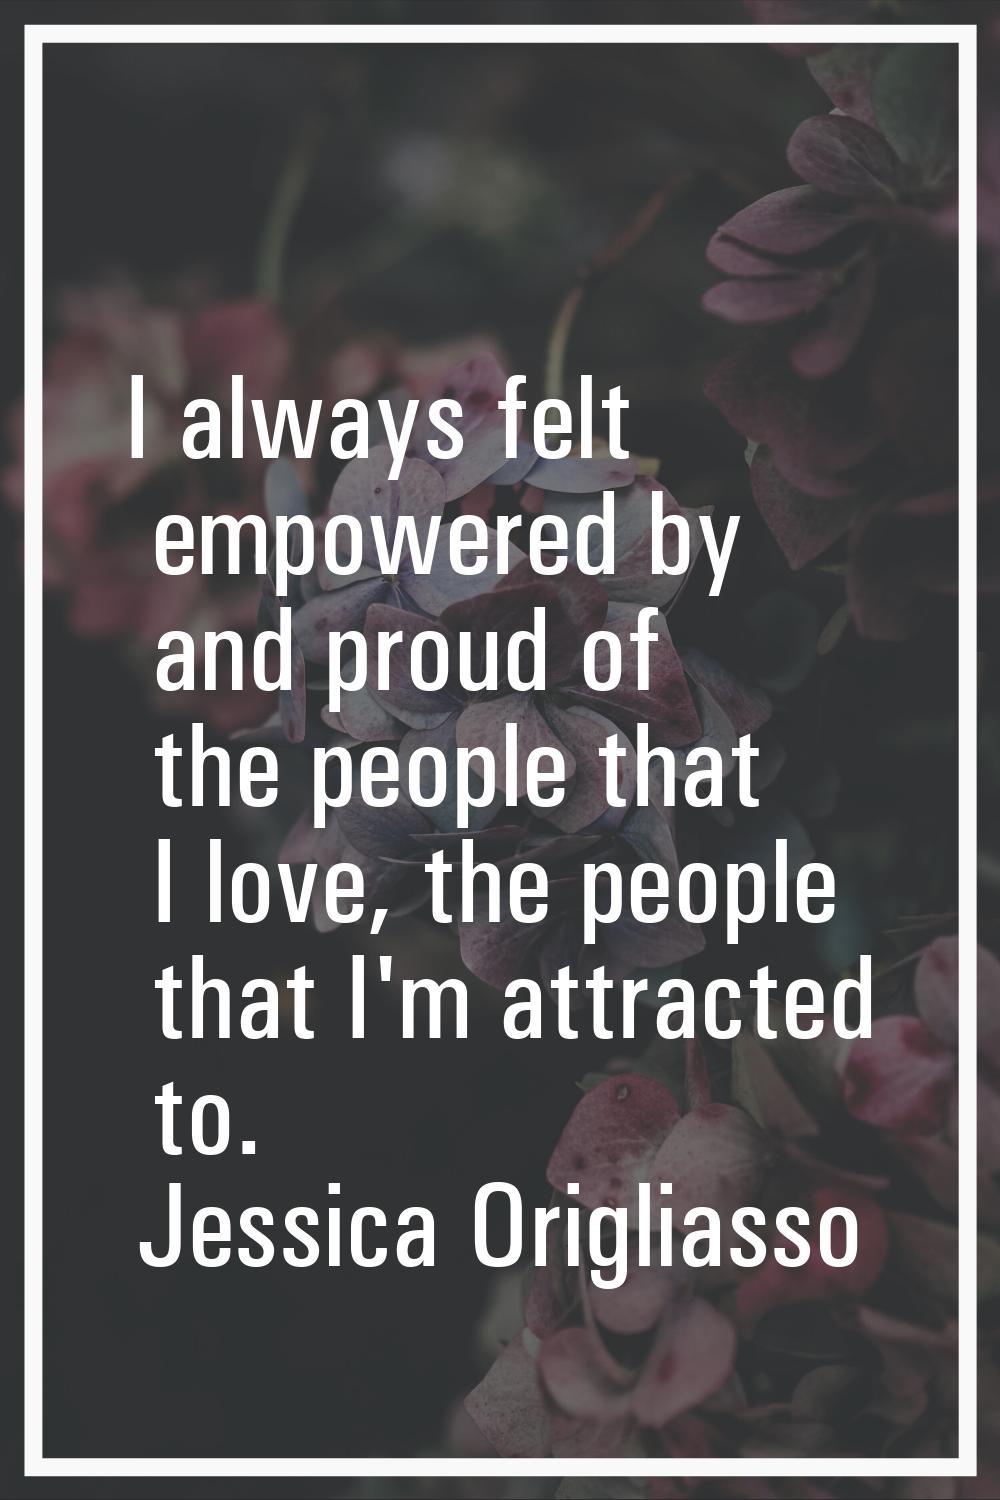 I always felt empowered by and proud of the people that I love, the people that I'm attracted to.